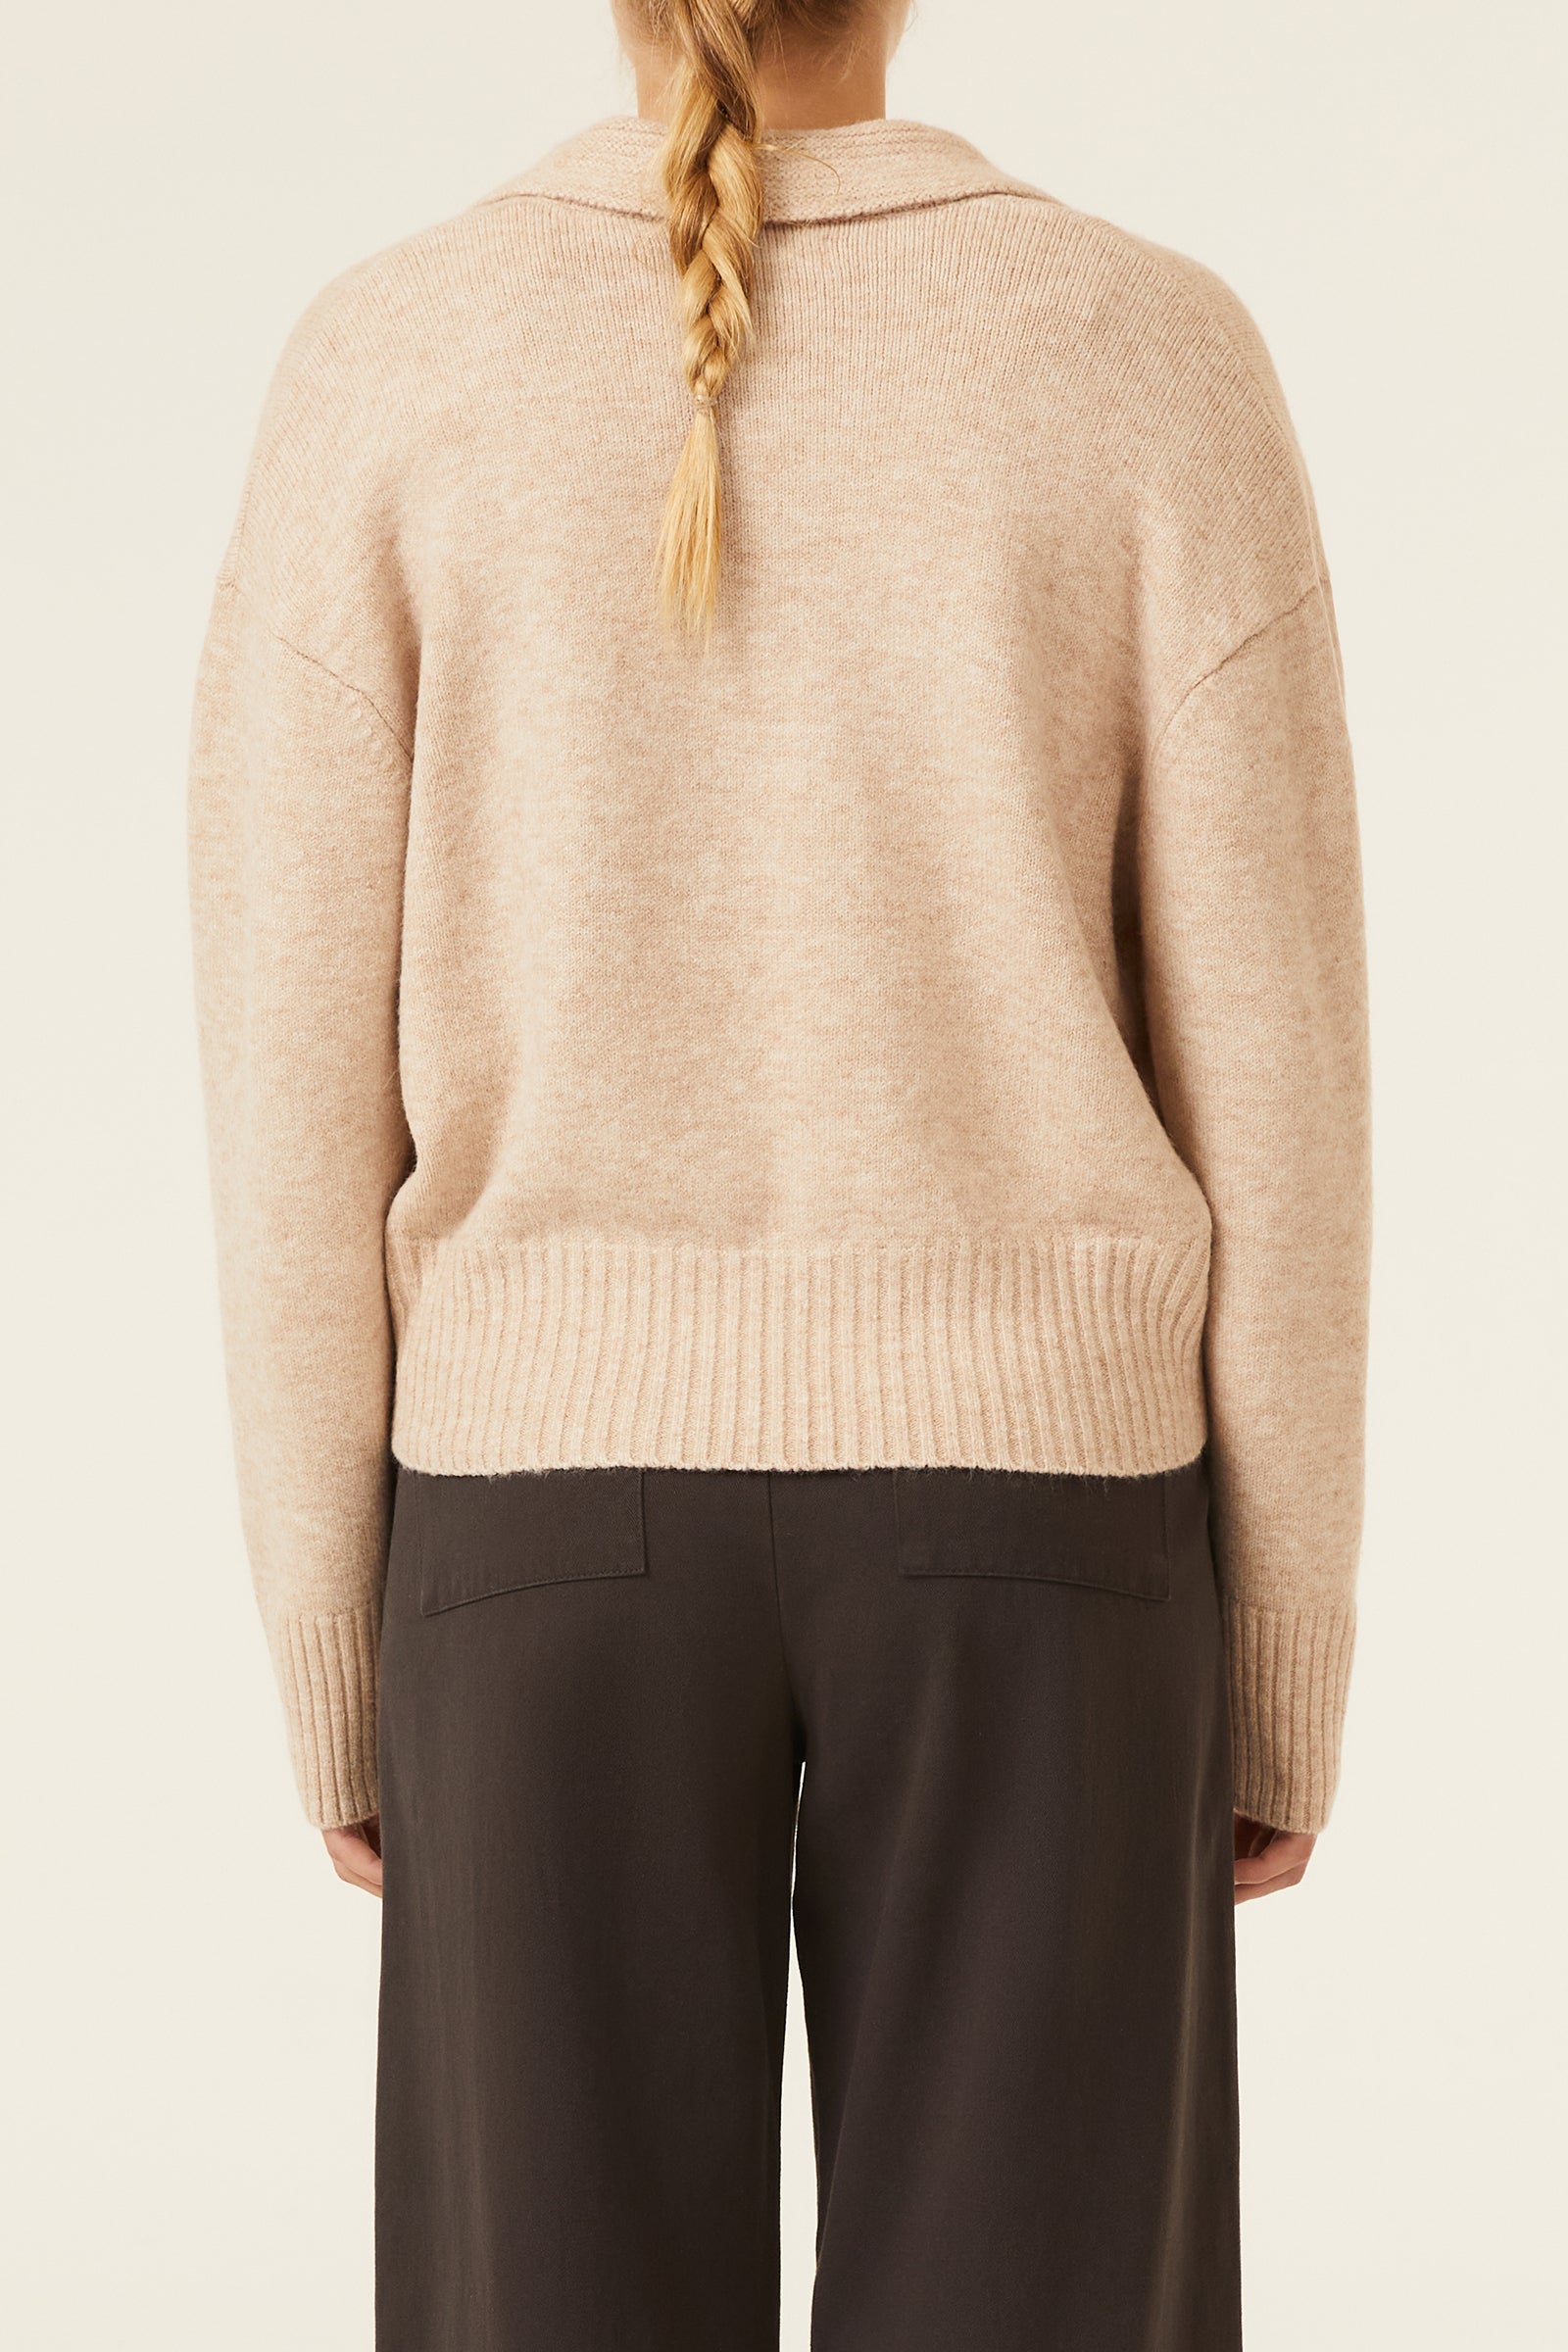 Nude Lucy Kinsley Rugby Knit In a Yellow Sand Colour